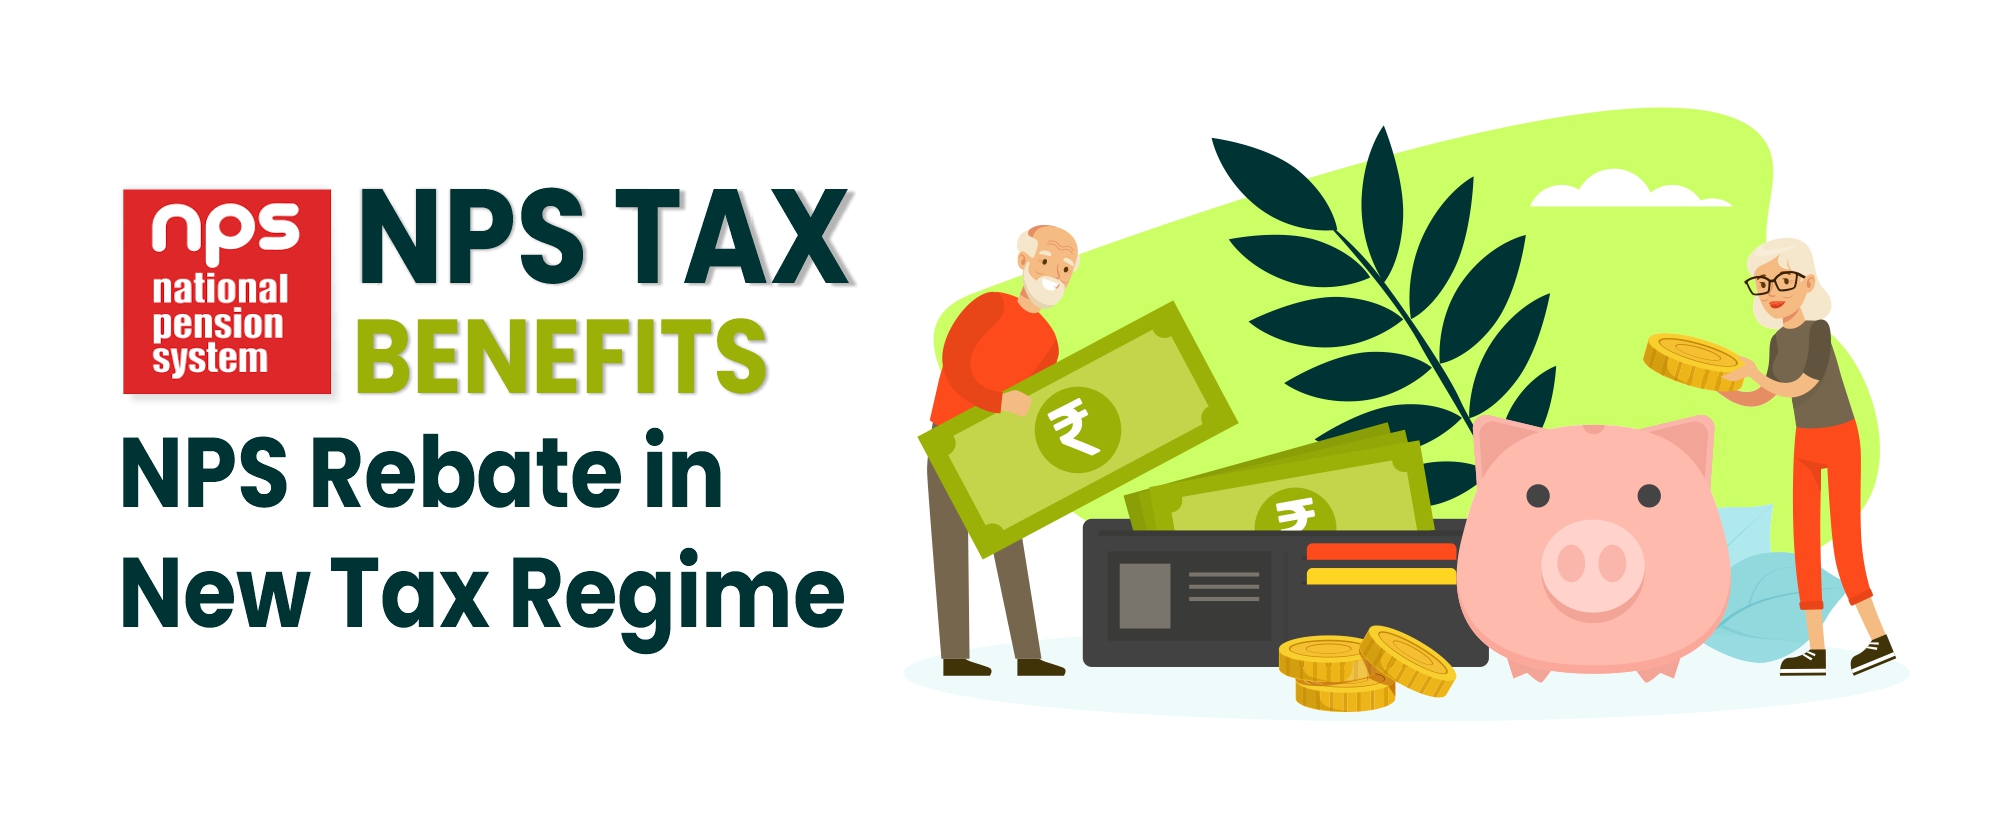 how-to-choose-between-the-new-and-old-income-tax-regimes-chandan